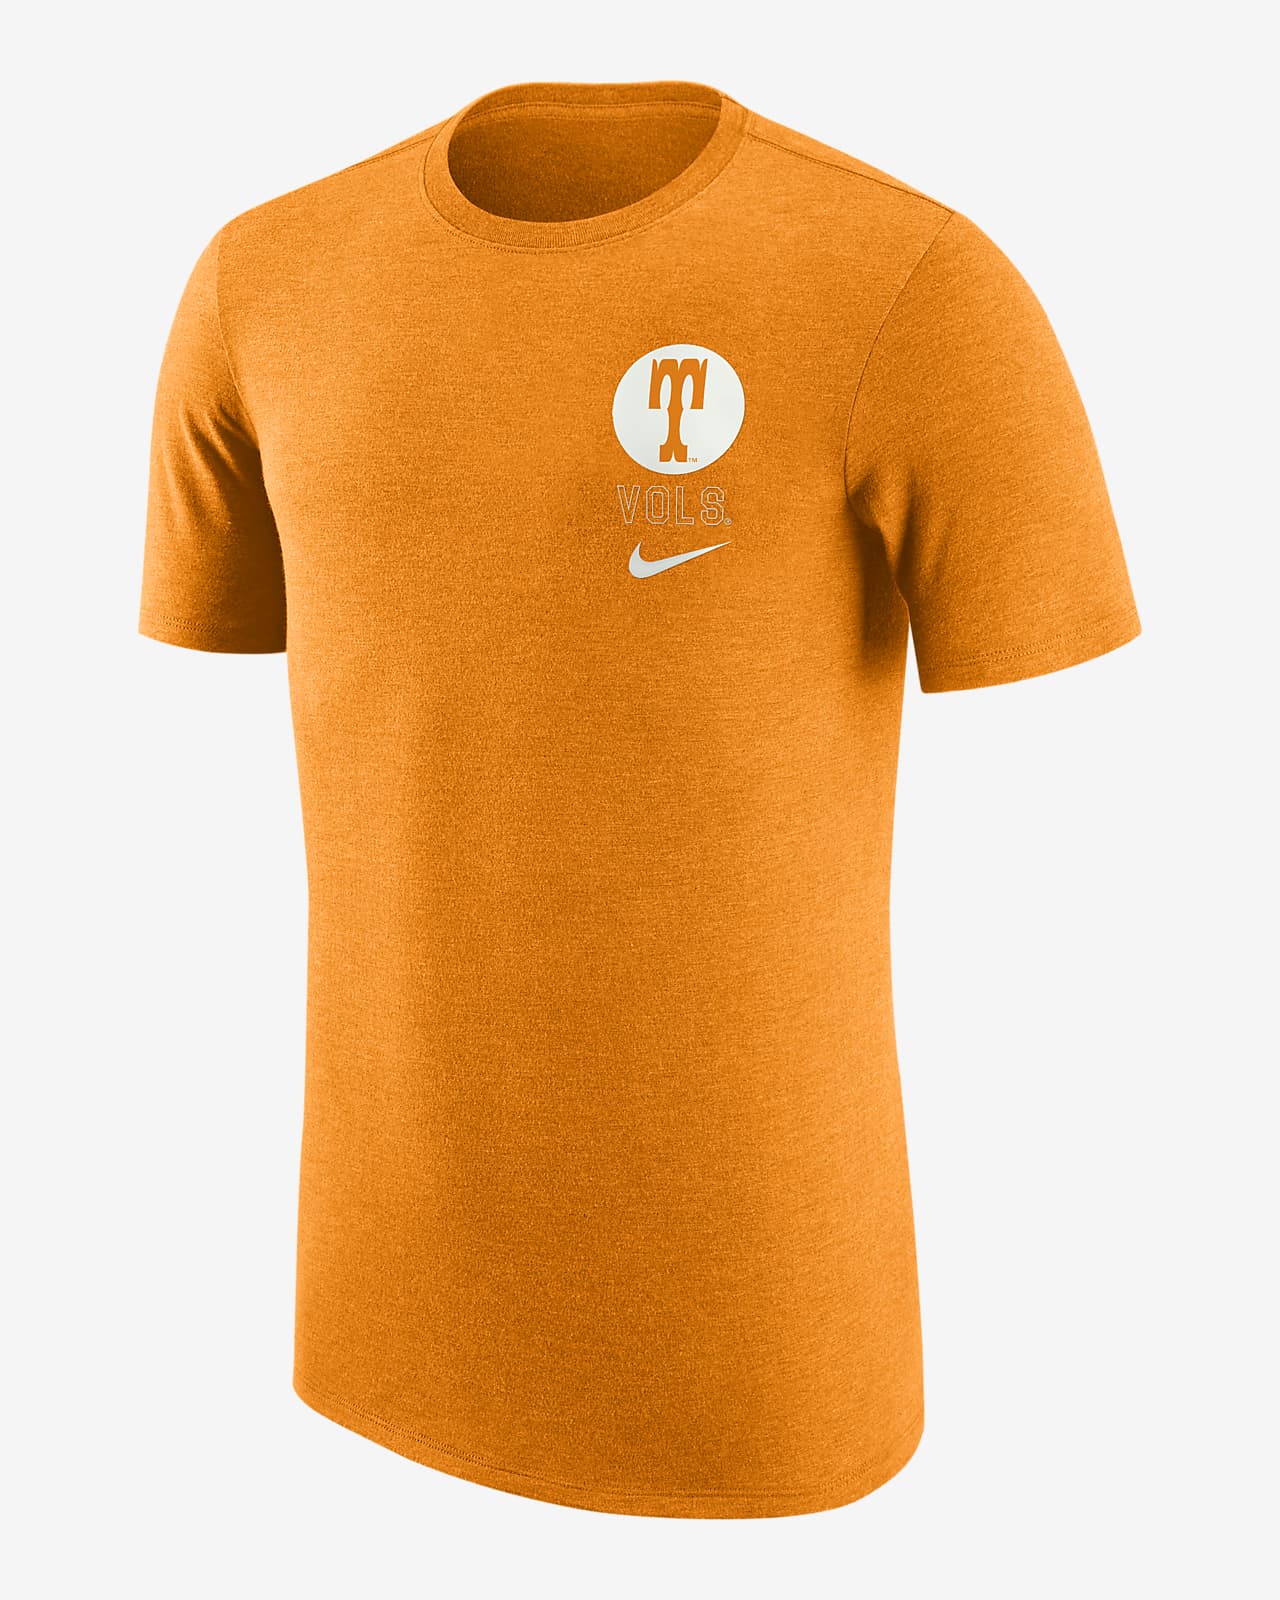 Tennessee Men's Nike College Crew-Neck T-Shirt